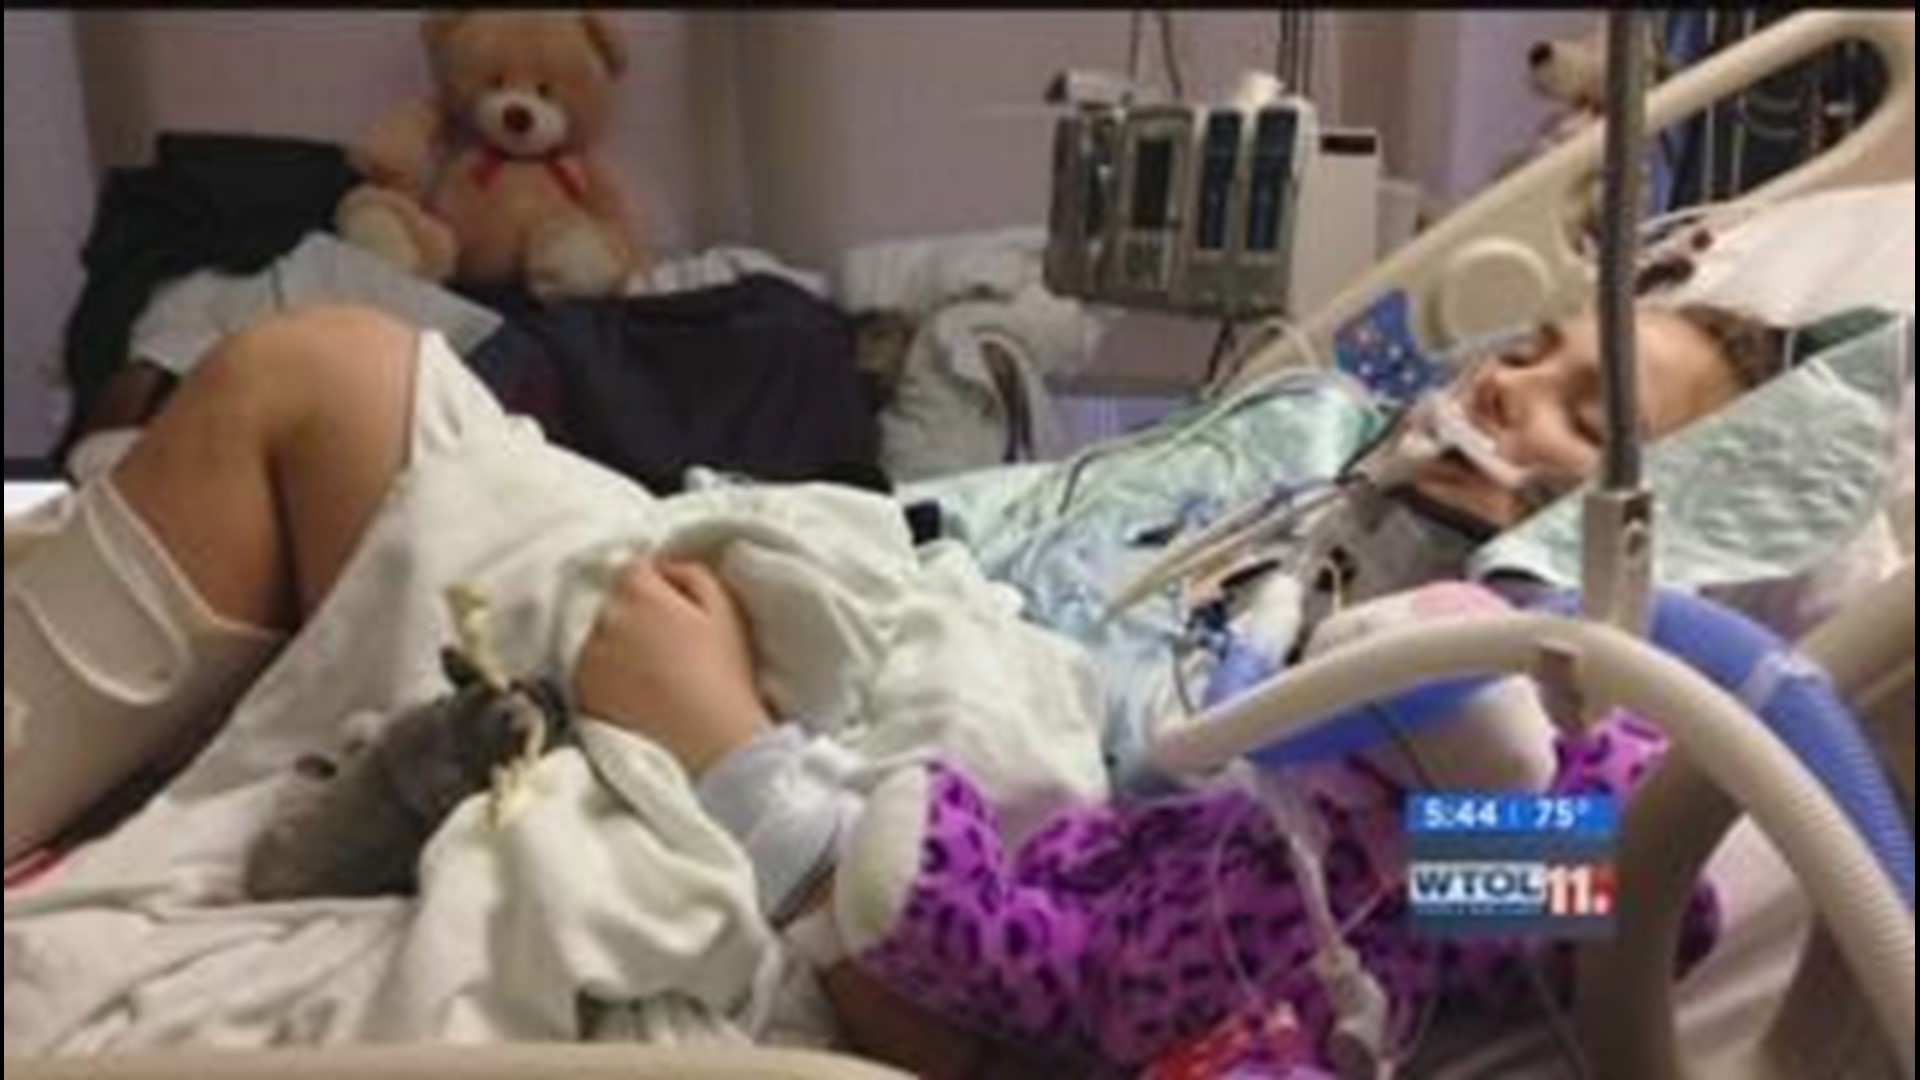 Miracle Kids: Family's bond helps teen find strength